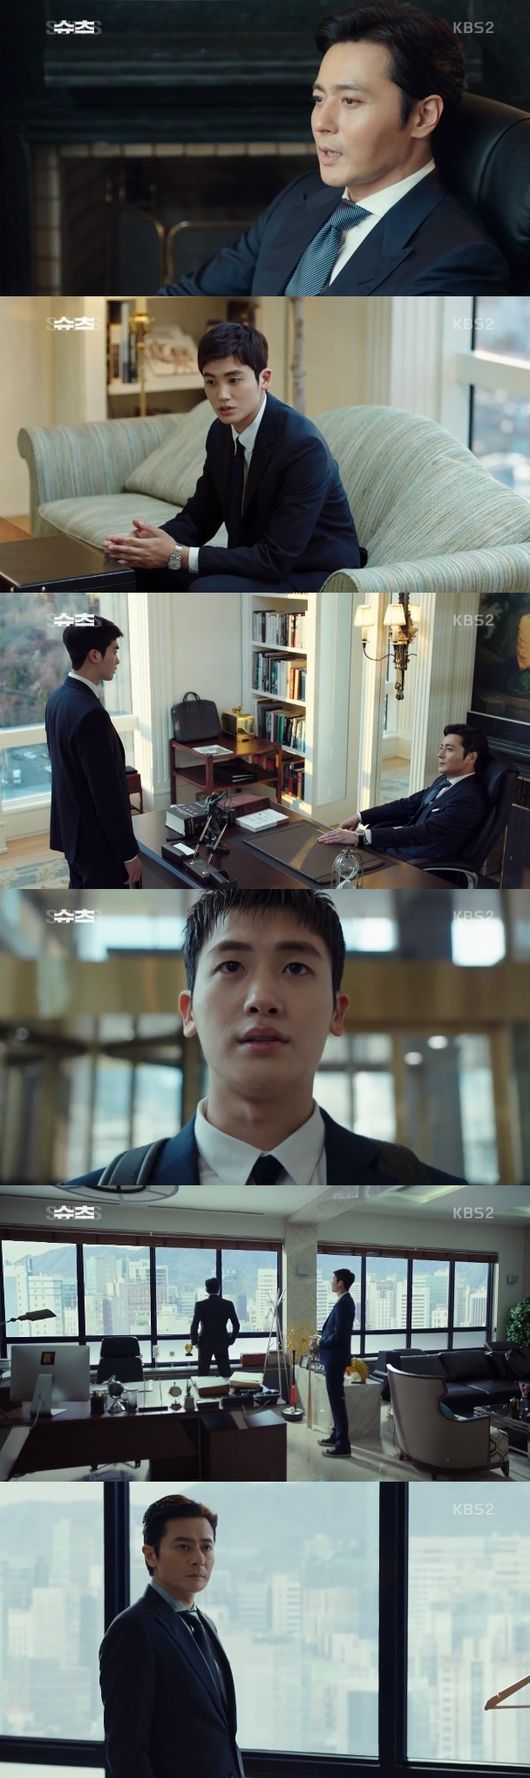 Suits Jang Dong-gun was selected as a new lawyer against the genius of Park Hyung-sik, but he was fired to go home in Haru Bay.In the KBS2 new drama Suits, which was first broadcast on the 25th, ace lawyer Miniforce Seok (Jang Dong-gun) of law firm Gang & Ham passed Memory genius Ko Yeon-woo (Park Hyung-sik) at an interview with a new lawyer, but he was shown fire as soon as he got to work. I met Park Joon-pyo (Lee Kyung-min), a chaebol, and boasted of his genius memory and knowledge.Park Joon-pyo put a check on Ko Yeon-woos memory to test, and in the process, Ko Yeon-woo, who was upset by sarcasm, touched his pride by hitting Park Joon-pyo.An angry Park Joon-pyo planned to get revenge, and made a drug bag delivered by Ko Yeon-woo through the iron.When Ko Yeon-woo was in a difficult situation, he headed to the hotel to deliver the bag, but there were Decectives lurking.Everything was a scheme of Park Joon-pyo, and Ko Yeon-woo started to escape from Detectives. At the same time, a new lawyer interview with law firm Gang & Ham was conducted at the hotel, and Miniforce was evaluating interviewees.Ko found an interview room while running away, deceived himself as a pervert, and entered the room with the Miniforce seat.Miniforce asked a variety of questions as soon as he saw the rainbow, and he answered the trick without clogging. At that moment, the bag that Ko Yeon-woo was holding was opened and new drugs were poured.Detectives came to the interview room at this time, and Miniforce watched the actions of Ko Yeon-woo in cooperation with the police work.As Detective continued to cast doubt, Ko Yeon-woo defended himself, referring to the Police Officers Job Enforcement Act.Here, Detectives even opened Ko Yeon-woos bag, but there were no drugs, and only legal books.A little while ago, when Miniforce was talking to Detectives through the door, Ko Yeon-woo took drugs from the bag and put legal books in it.Miniforce admired the genius and sense of Ko Yeon-woo, who had taken drugs in the bag in advance at the moment when the evidence was most important.